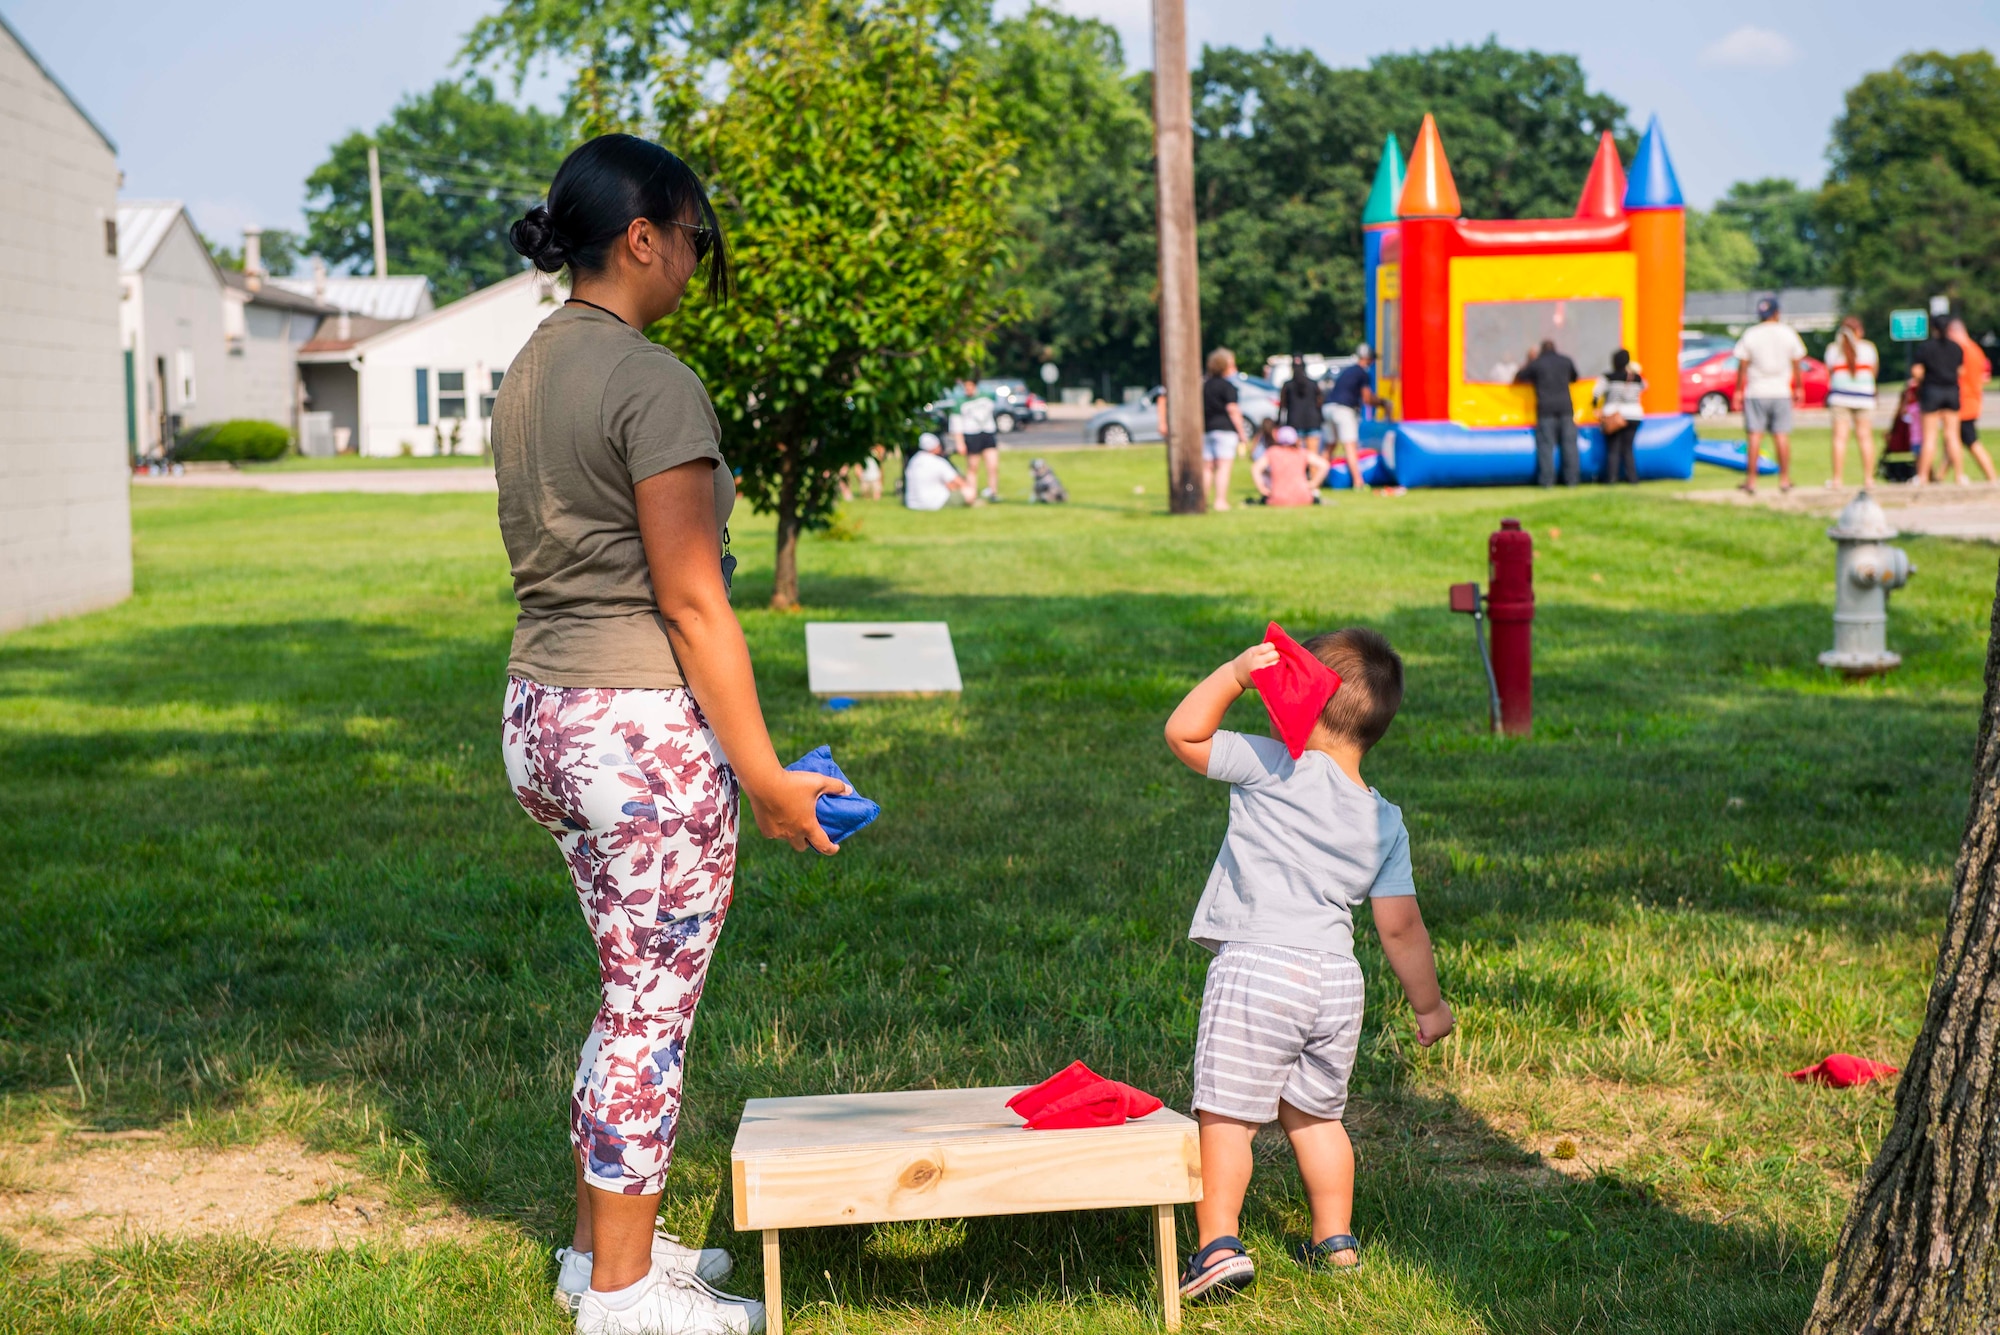 A woman with an ocp shirt and colorful pants stands over a cornhole board holding a blue bag while her very young son stands on the other side of the board and throws a red bag at the opposing board underneath a tree in a grassy lot with a bouncy house in the background that has many children and parents standing around it.